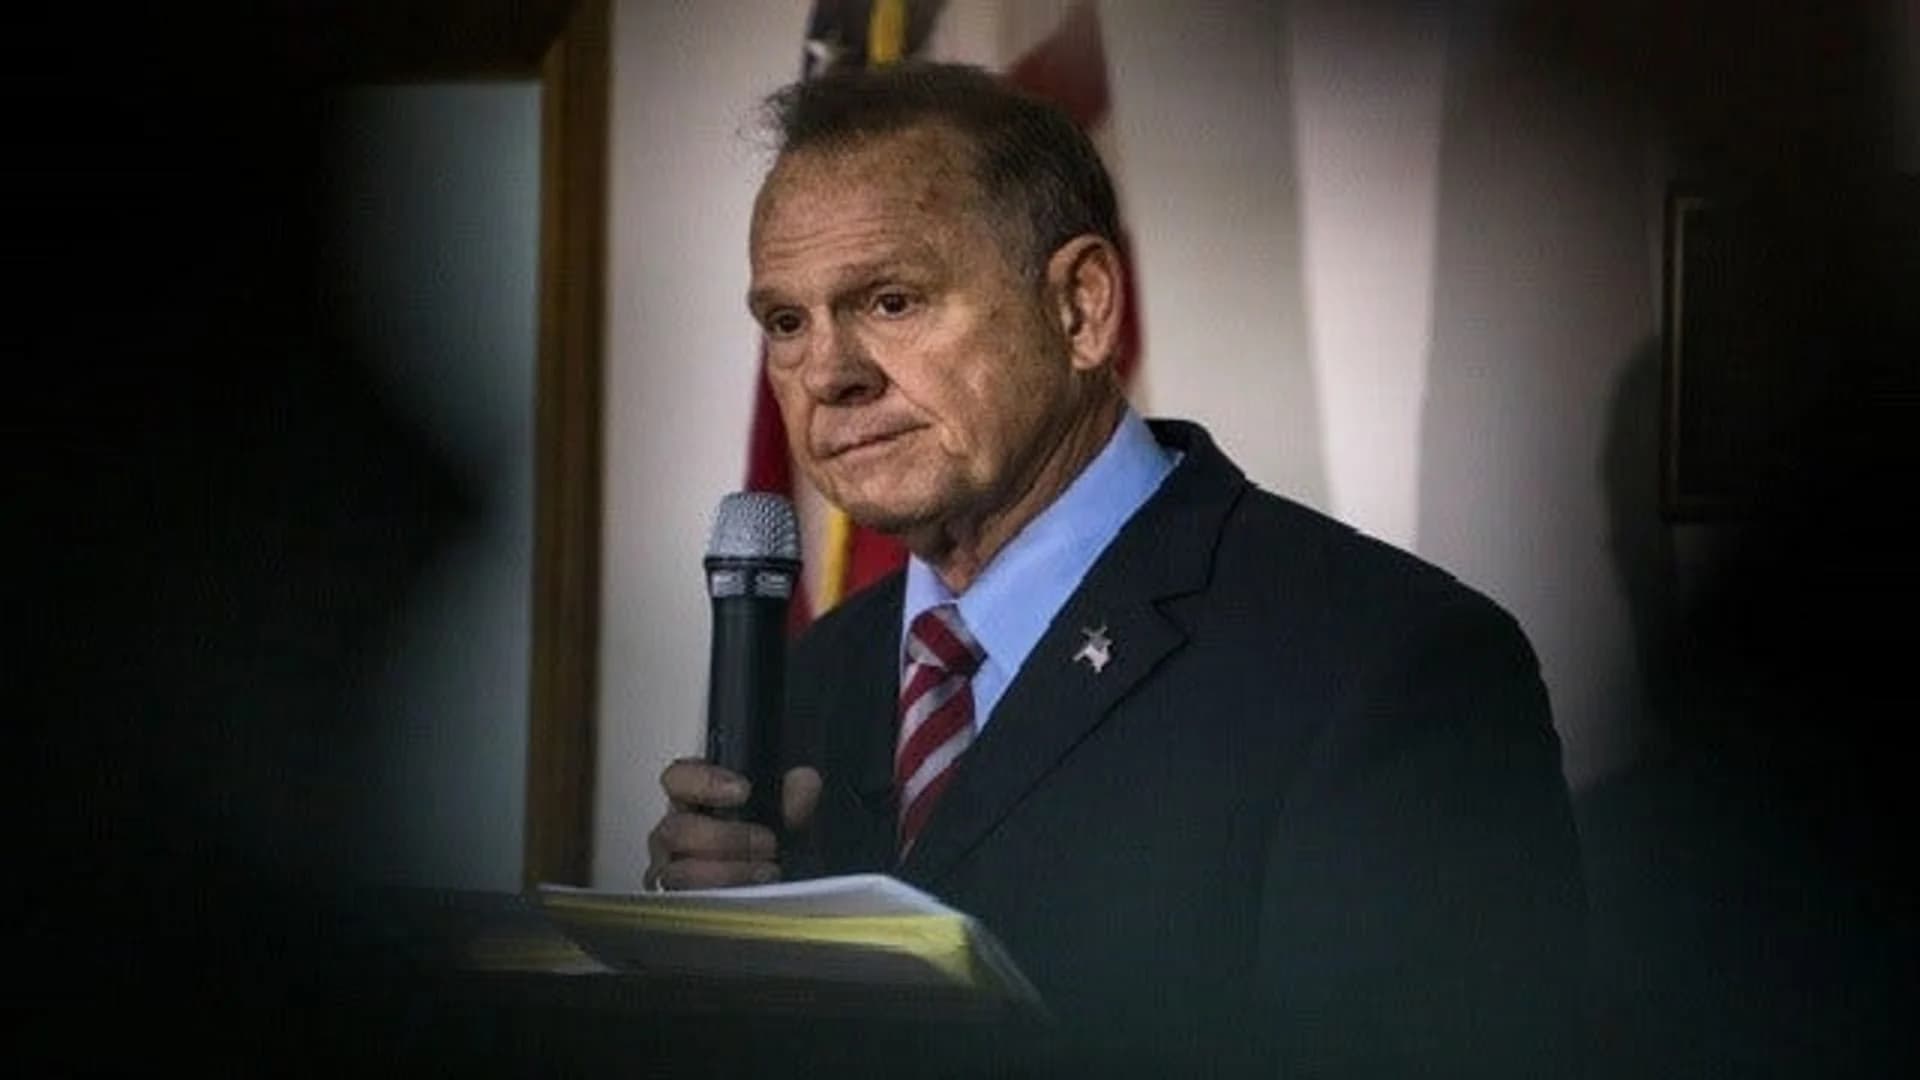 Trump offers full support for embattled Republican Roy Moore